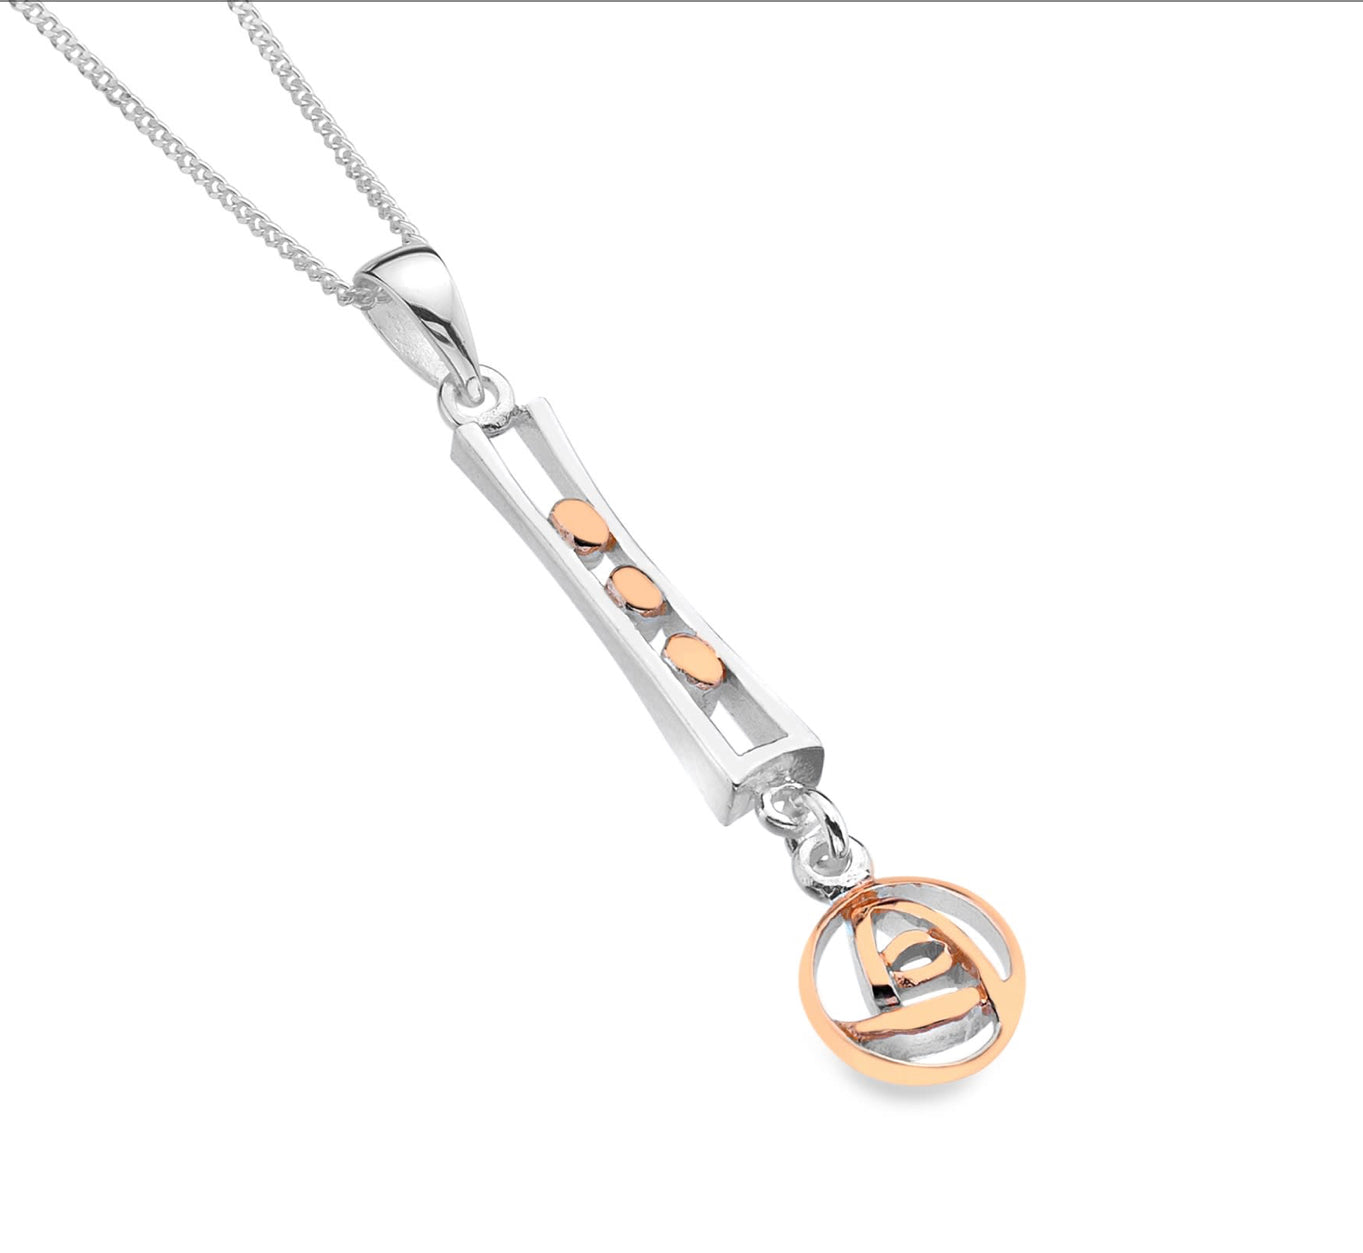 Sea Gems Rose Gold Plated Silver and Sterling Silver Mackintosh Pendant  - 6142SG